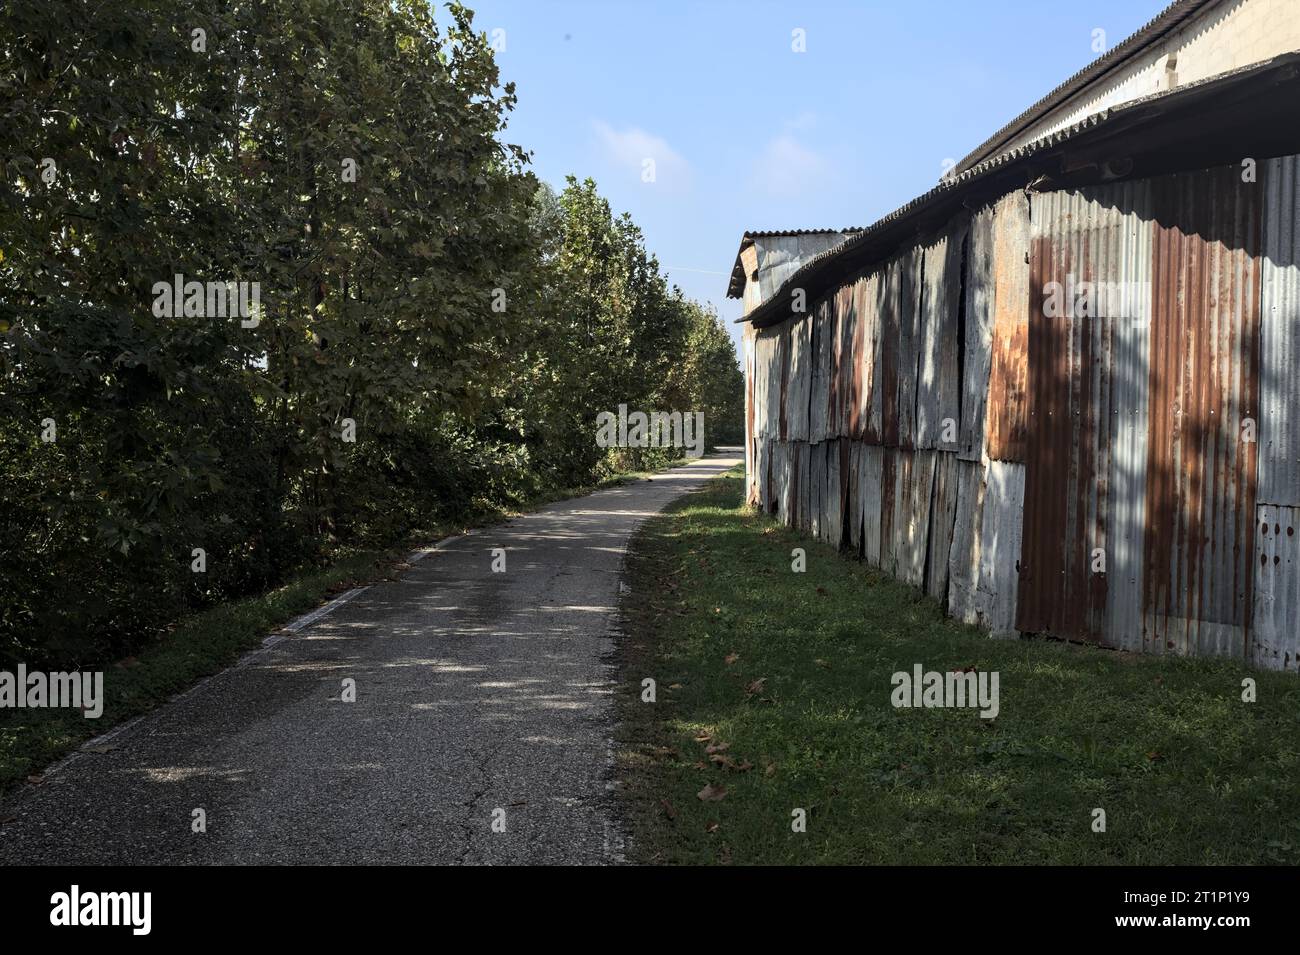 Narrow  road bordered by a row of trees next to a building in the italian countryside Stock Photo